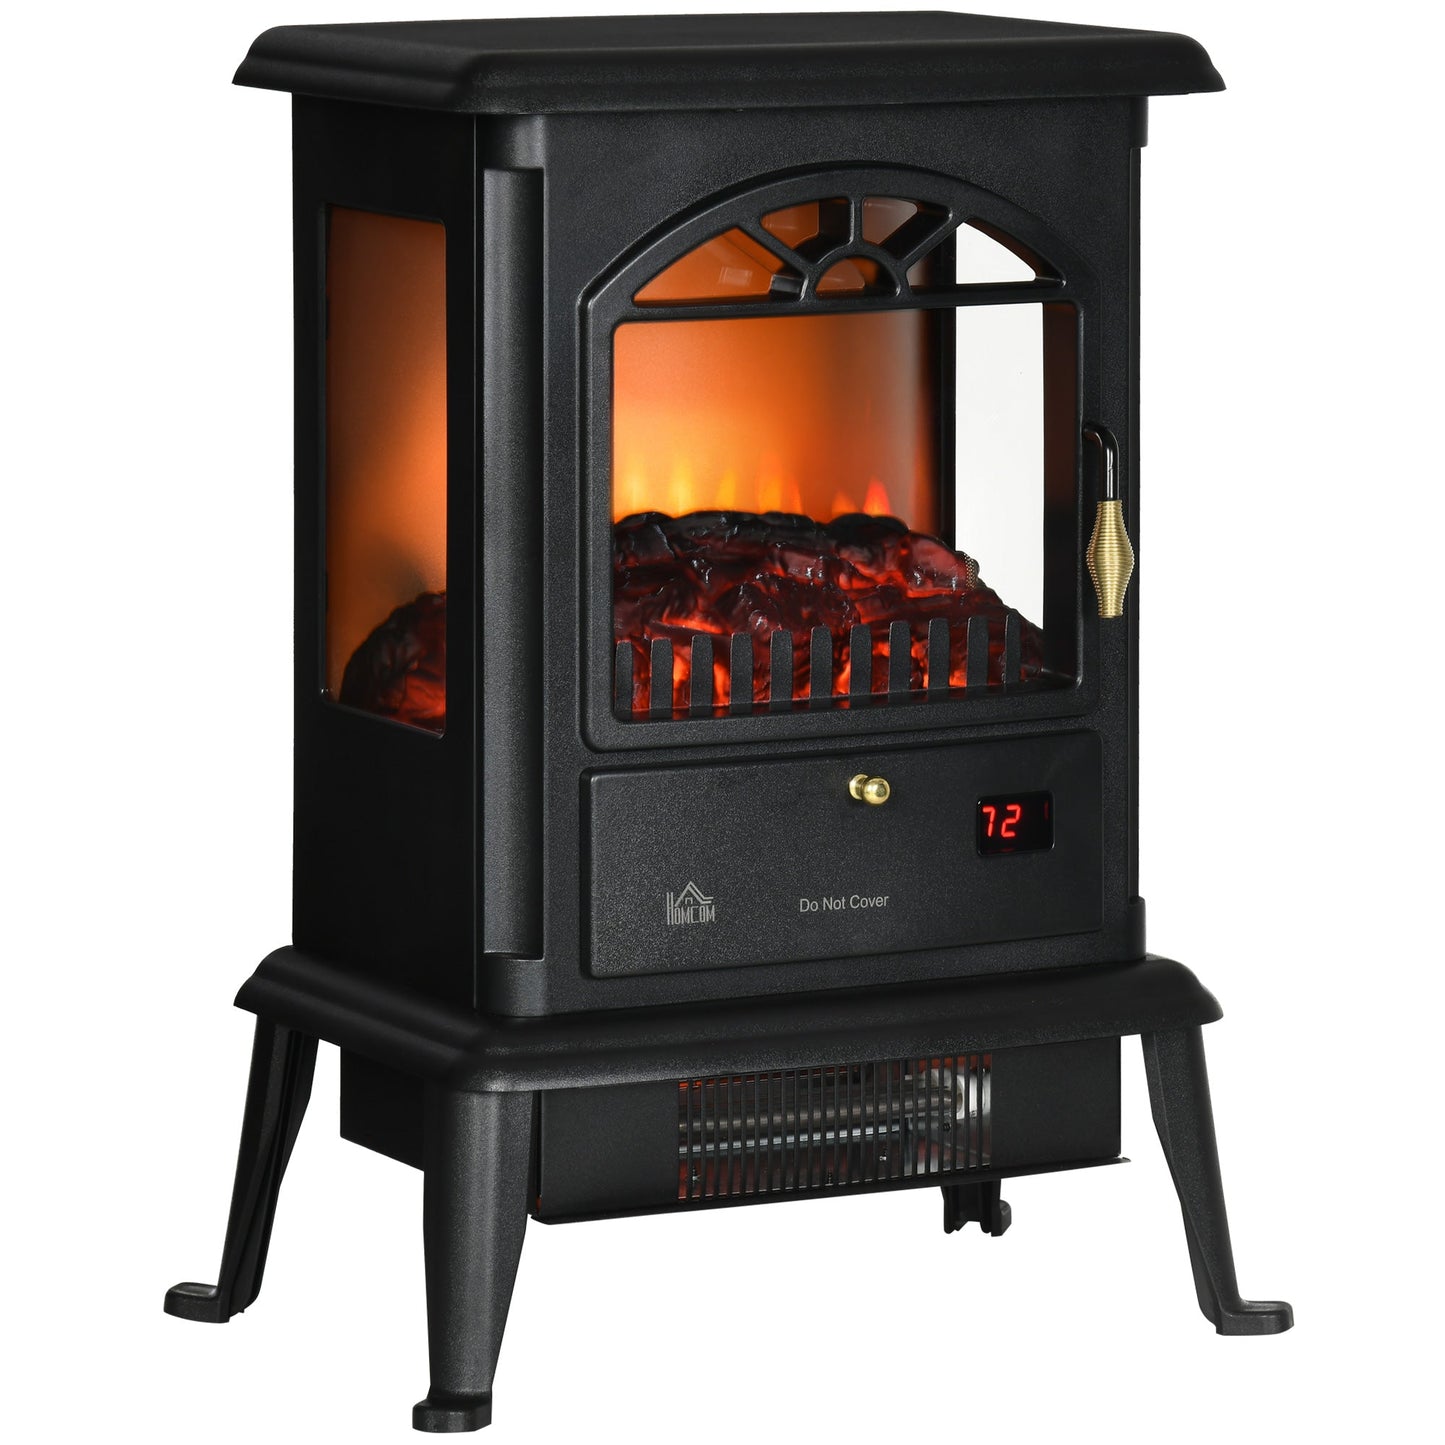 Miscellaneous-23" Small Electric Fireplace, Free standing Fireplace Heater with Realistic Flame, Adjustable Temperature, Timer, 1000W/1500W, Black - Outdoor Style Company